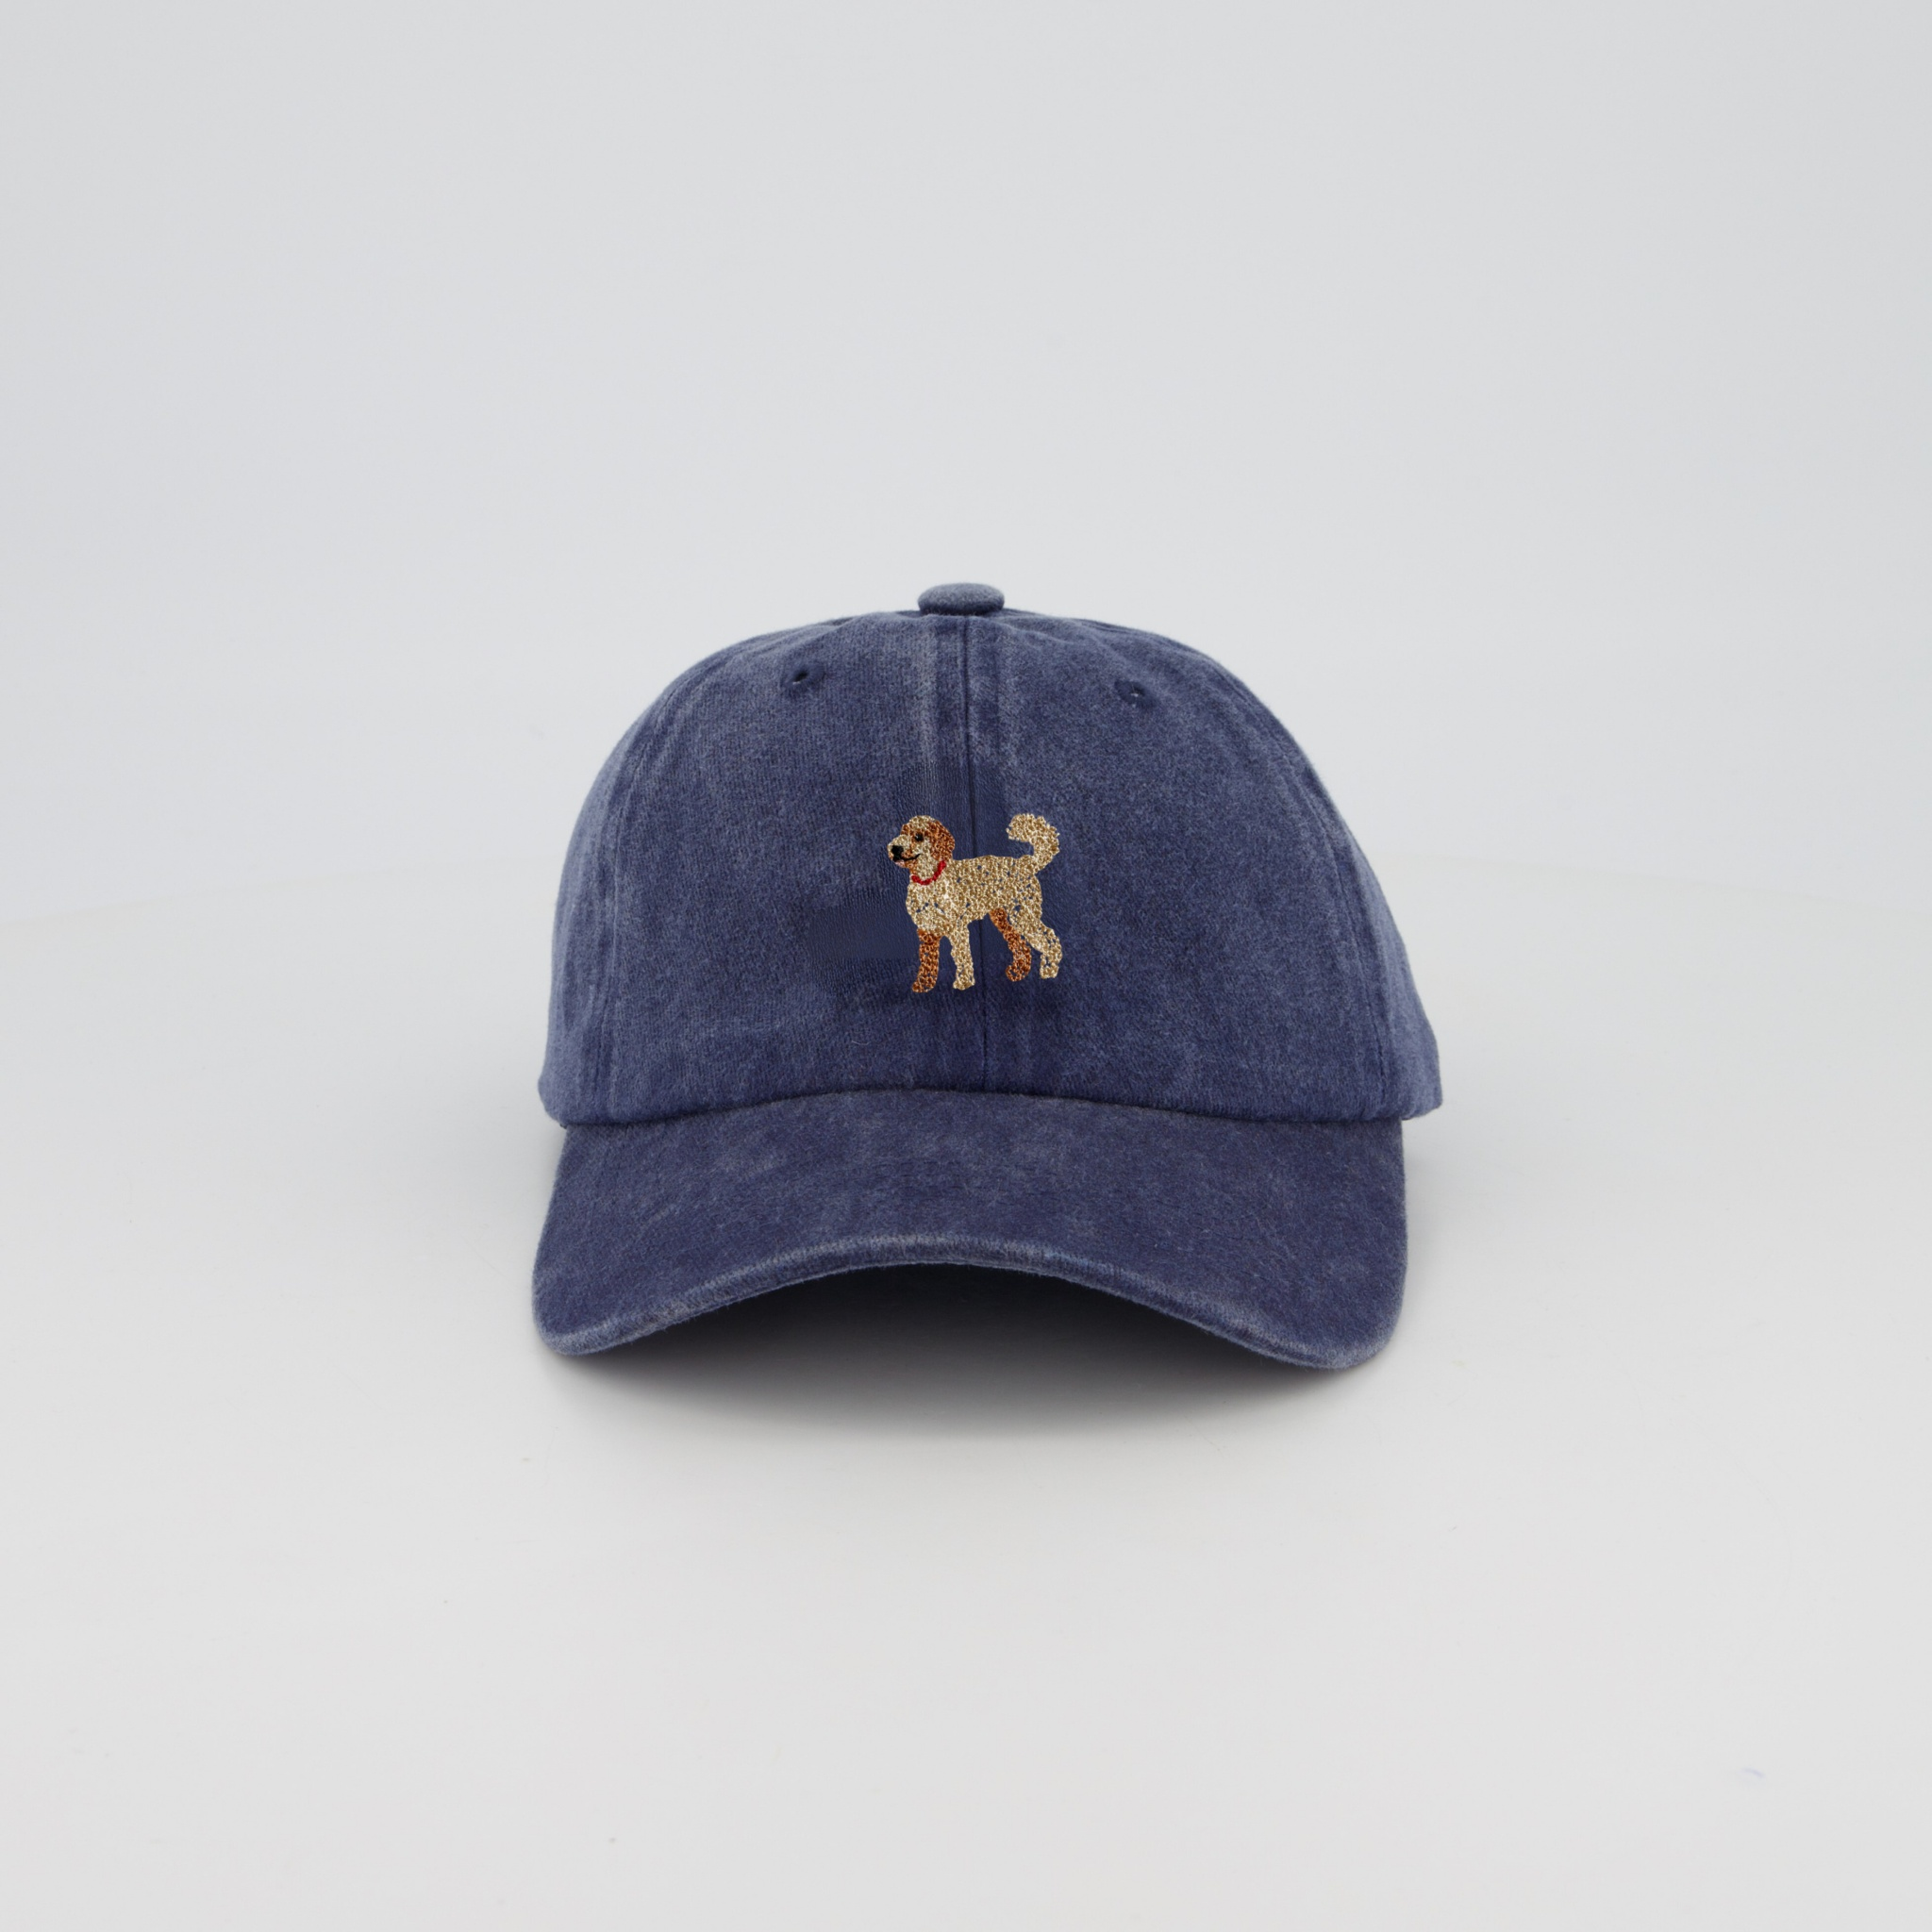 Vintage Navy Personalised Hat with Hand-drawn Labradoodle Embroidery Design 